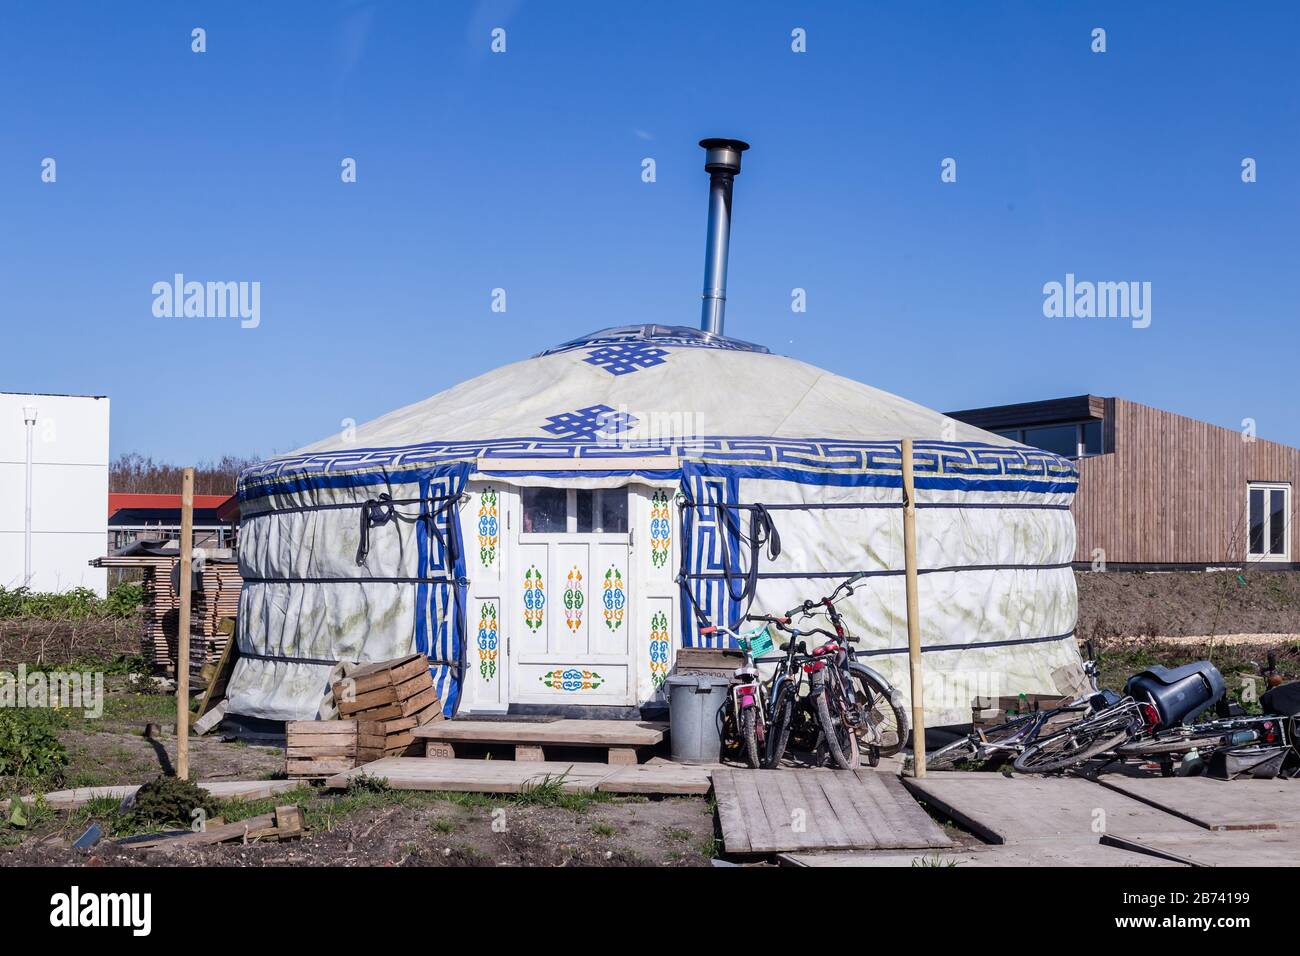 Almere, Netherlands,March 12, 2020: Yurt house for alternative living in Eco  friendly modern in destrict Oosterwold in Almere Netherlands Stock Photo -  Alamy